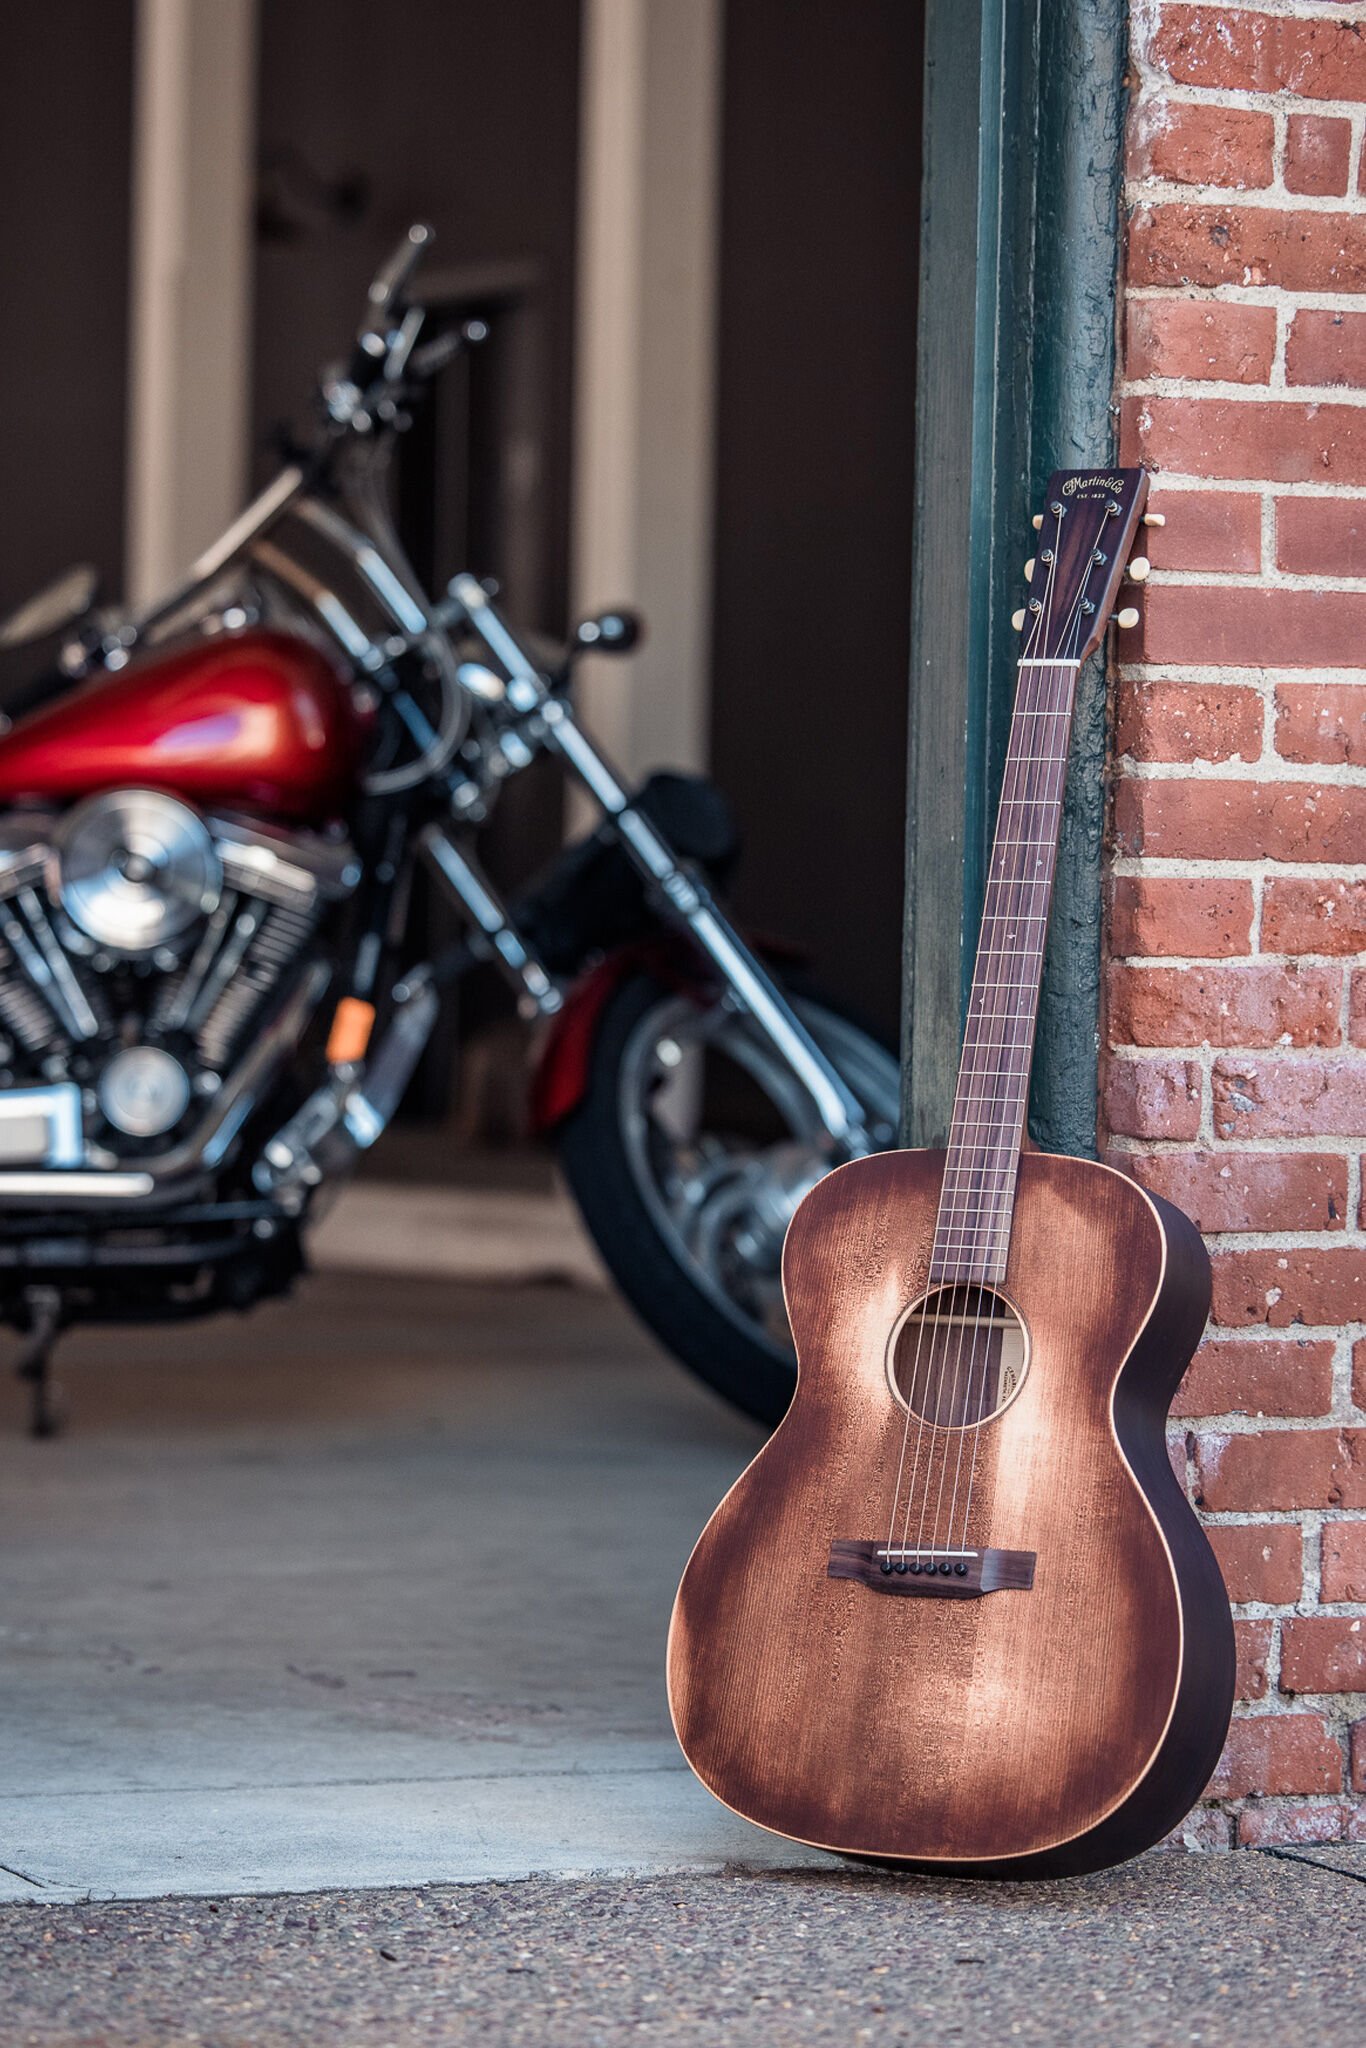 Photo of an acoustic guitar resting against a brick wall with a red motorcycle in the background